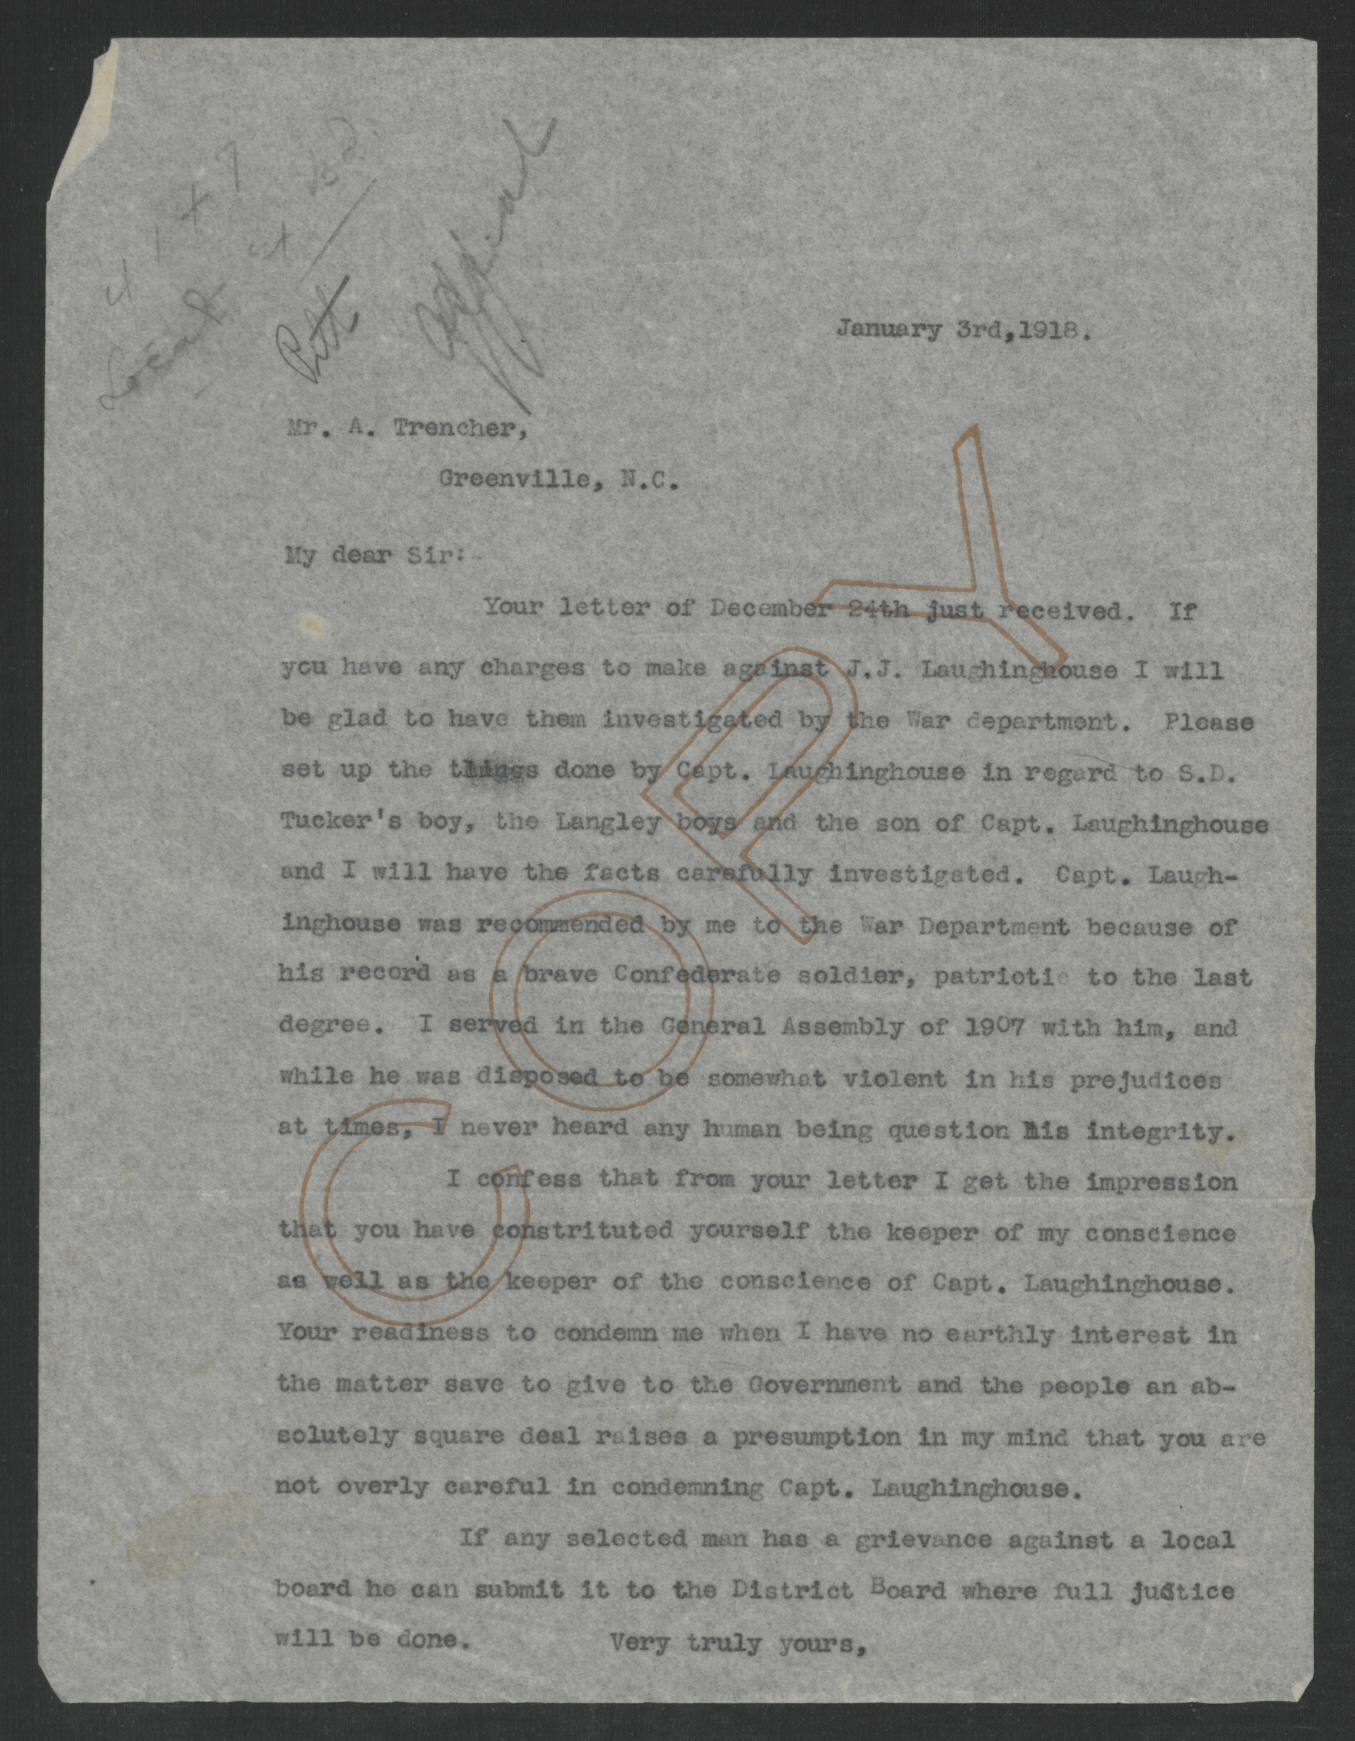 Letter from Thomas W. Bickett to A. Trencher, January 3, 1918